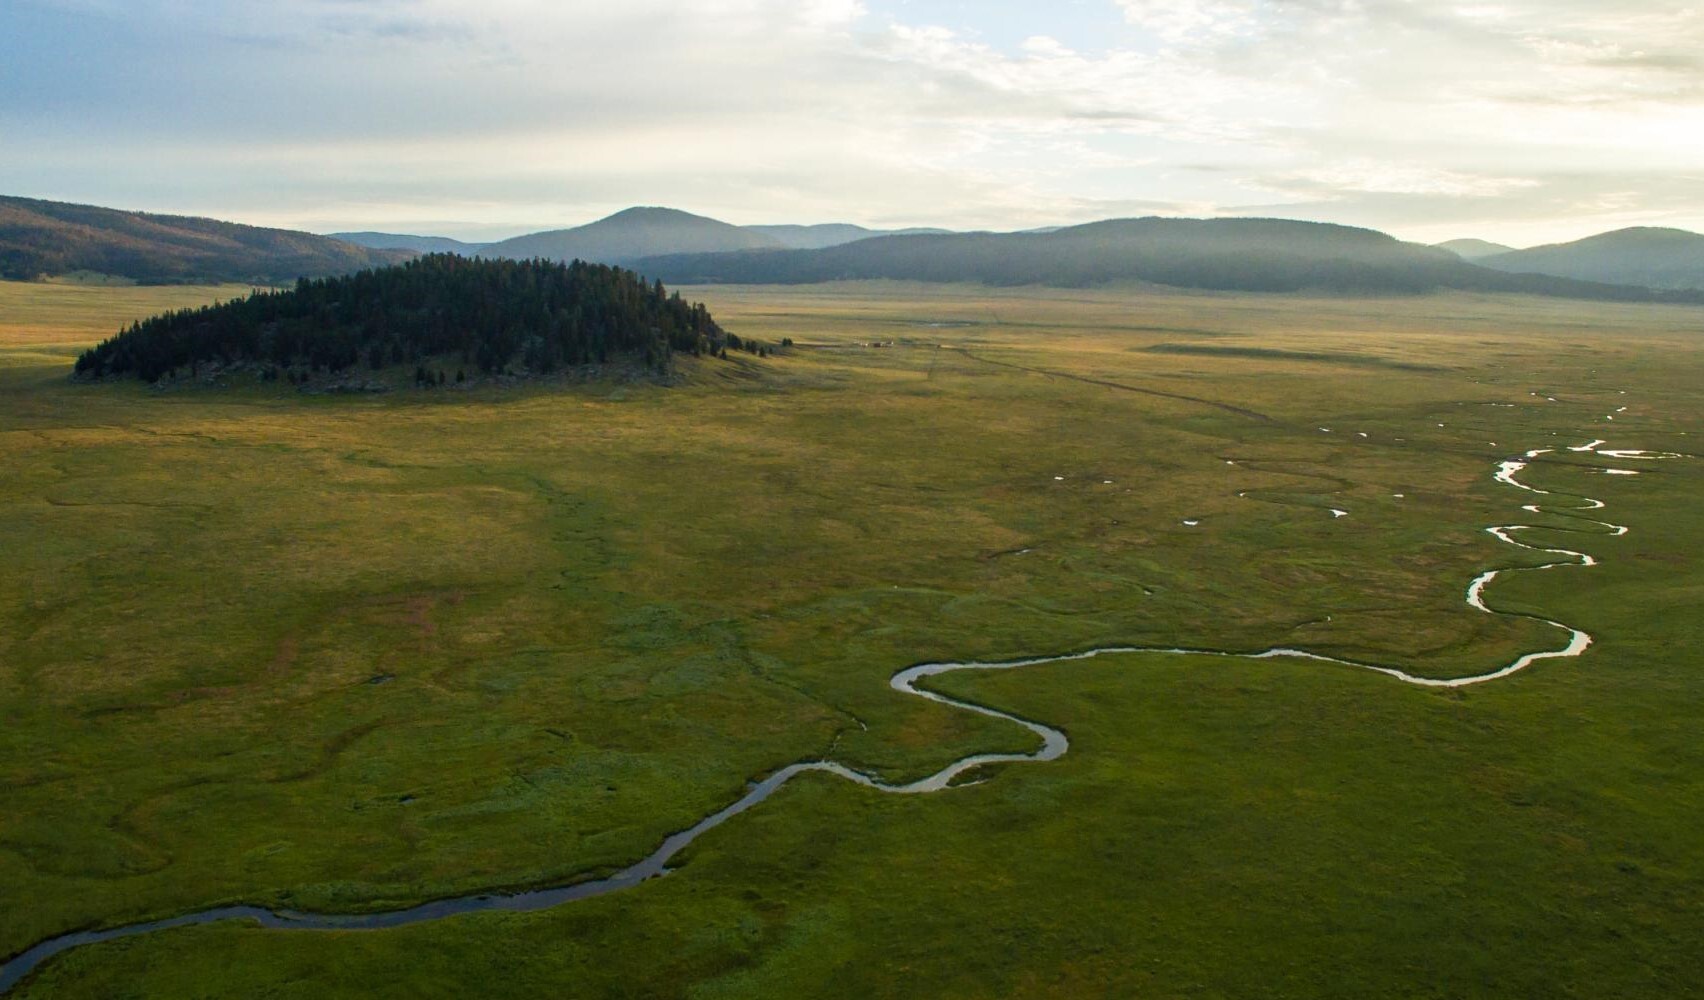 Featured image for “Bucket List Alert: Visit one of Only Six Super Volcanoes in the World at Valles Caldera National Preserve!”